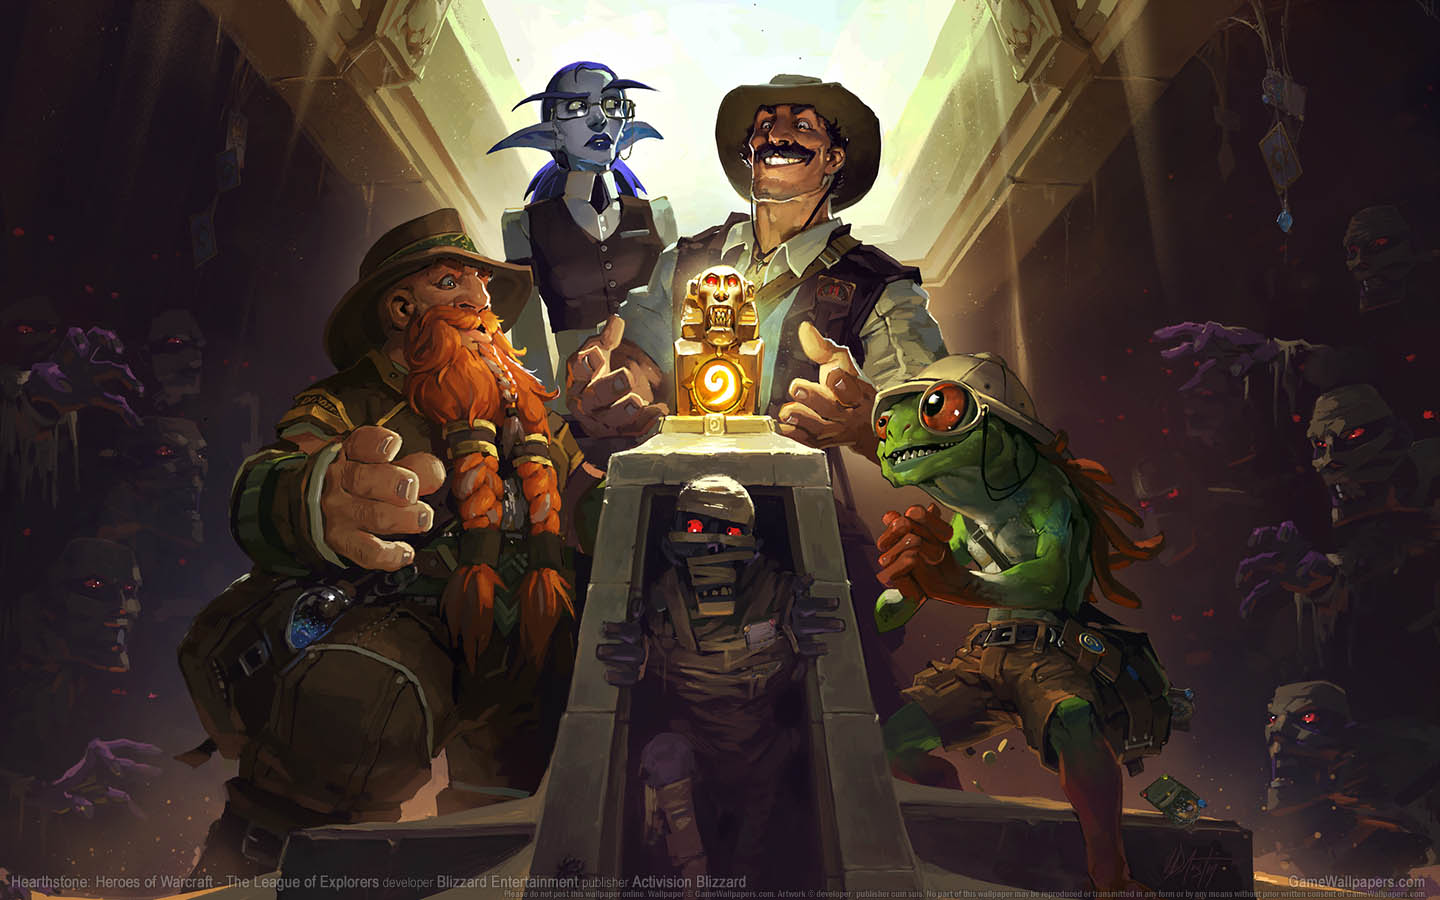 Hearthstone: Heroes of Warcraft - The League of Explorers wallpaper 01 1440x900